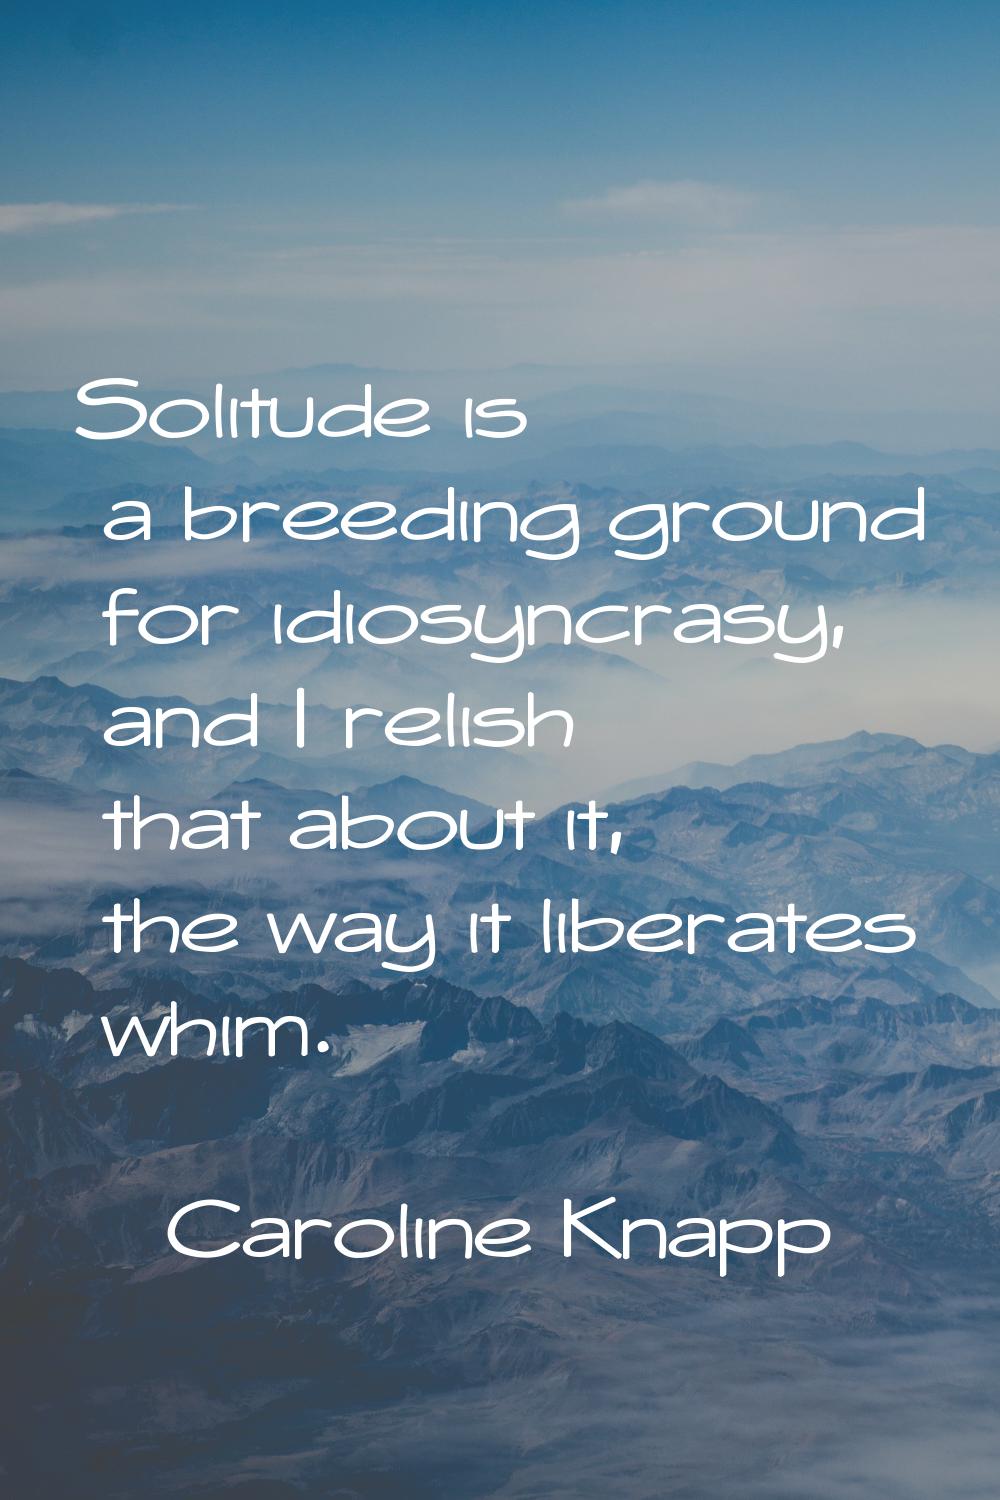 Solitude is a breeding ground for idiosyncrasy, and I relish that about it, the way it liberates wh